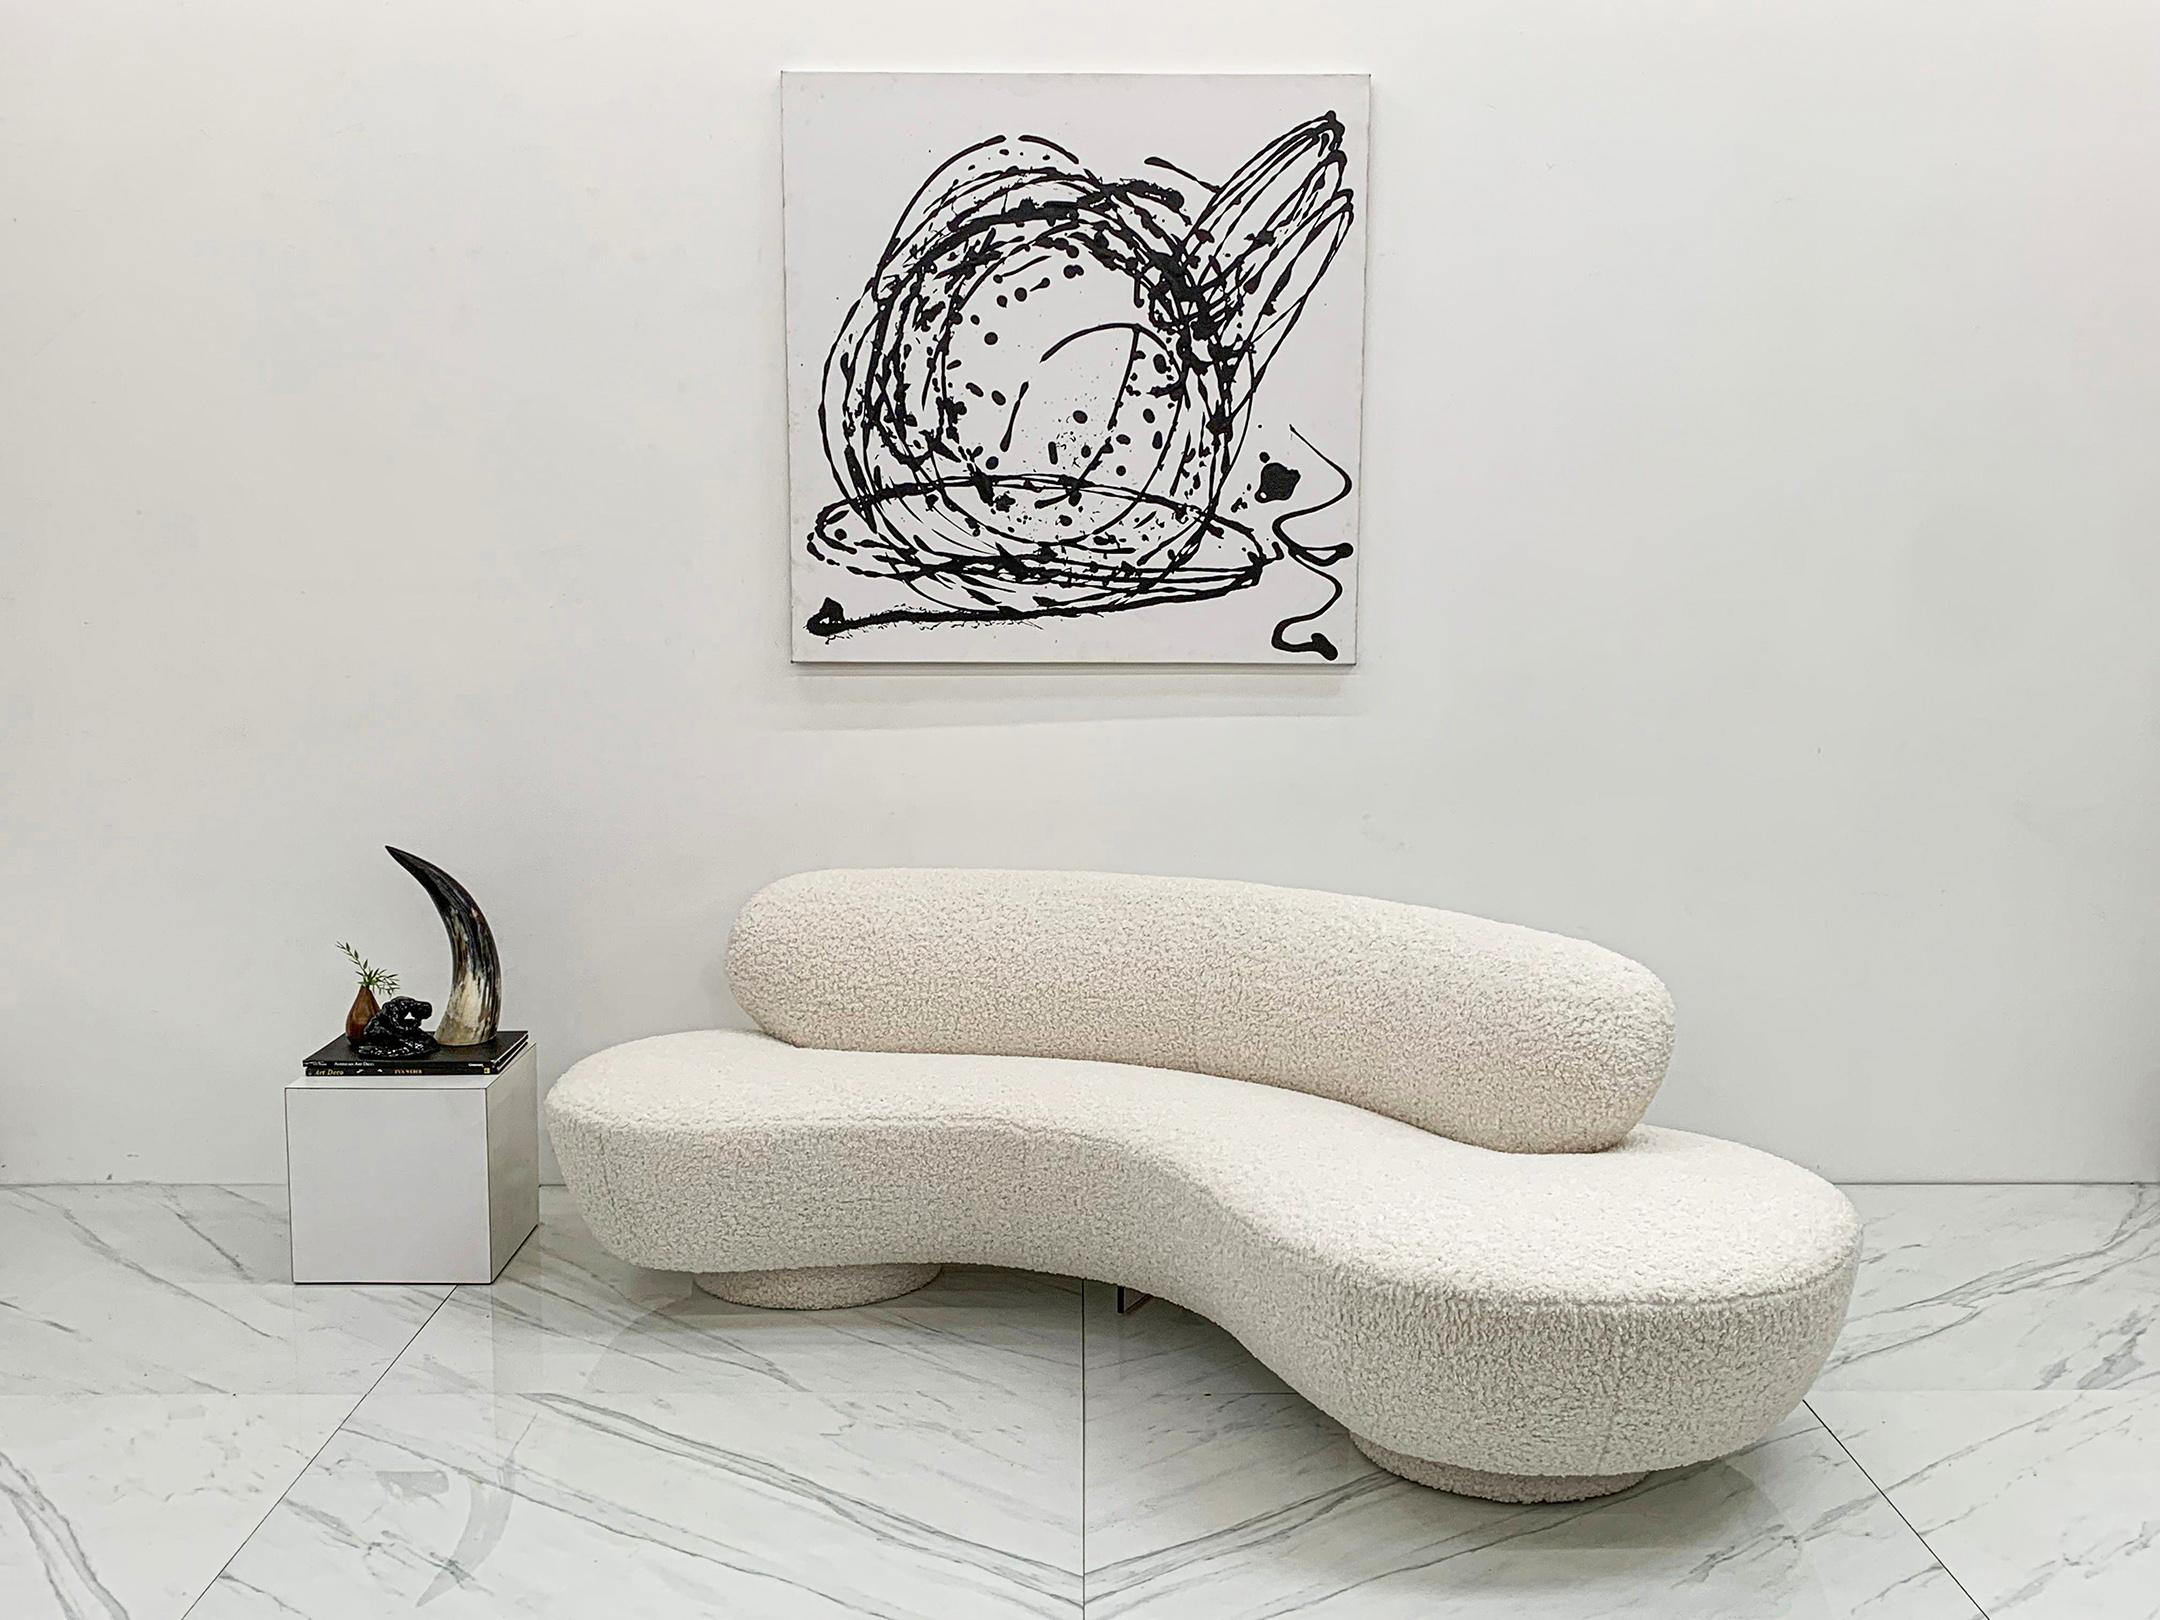 This Vladimir Kagan sofa is simply stunning. The entire sofa has been upholstered in a heavy ivory bouclé, including the double disc bottom. This heavily textured sofa is not only visually appealing, it's insanely comfortable and is incredibly